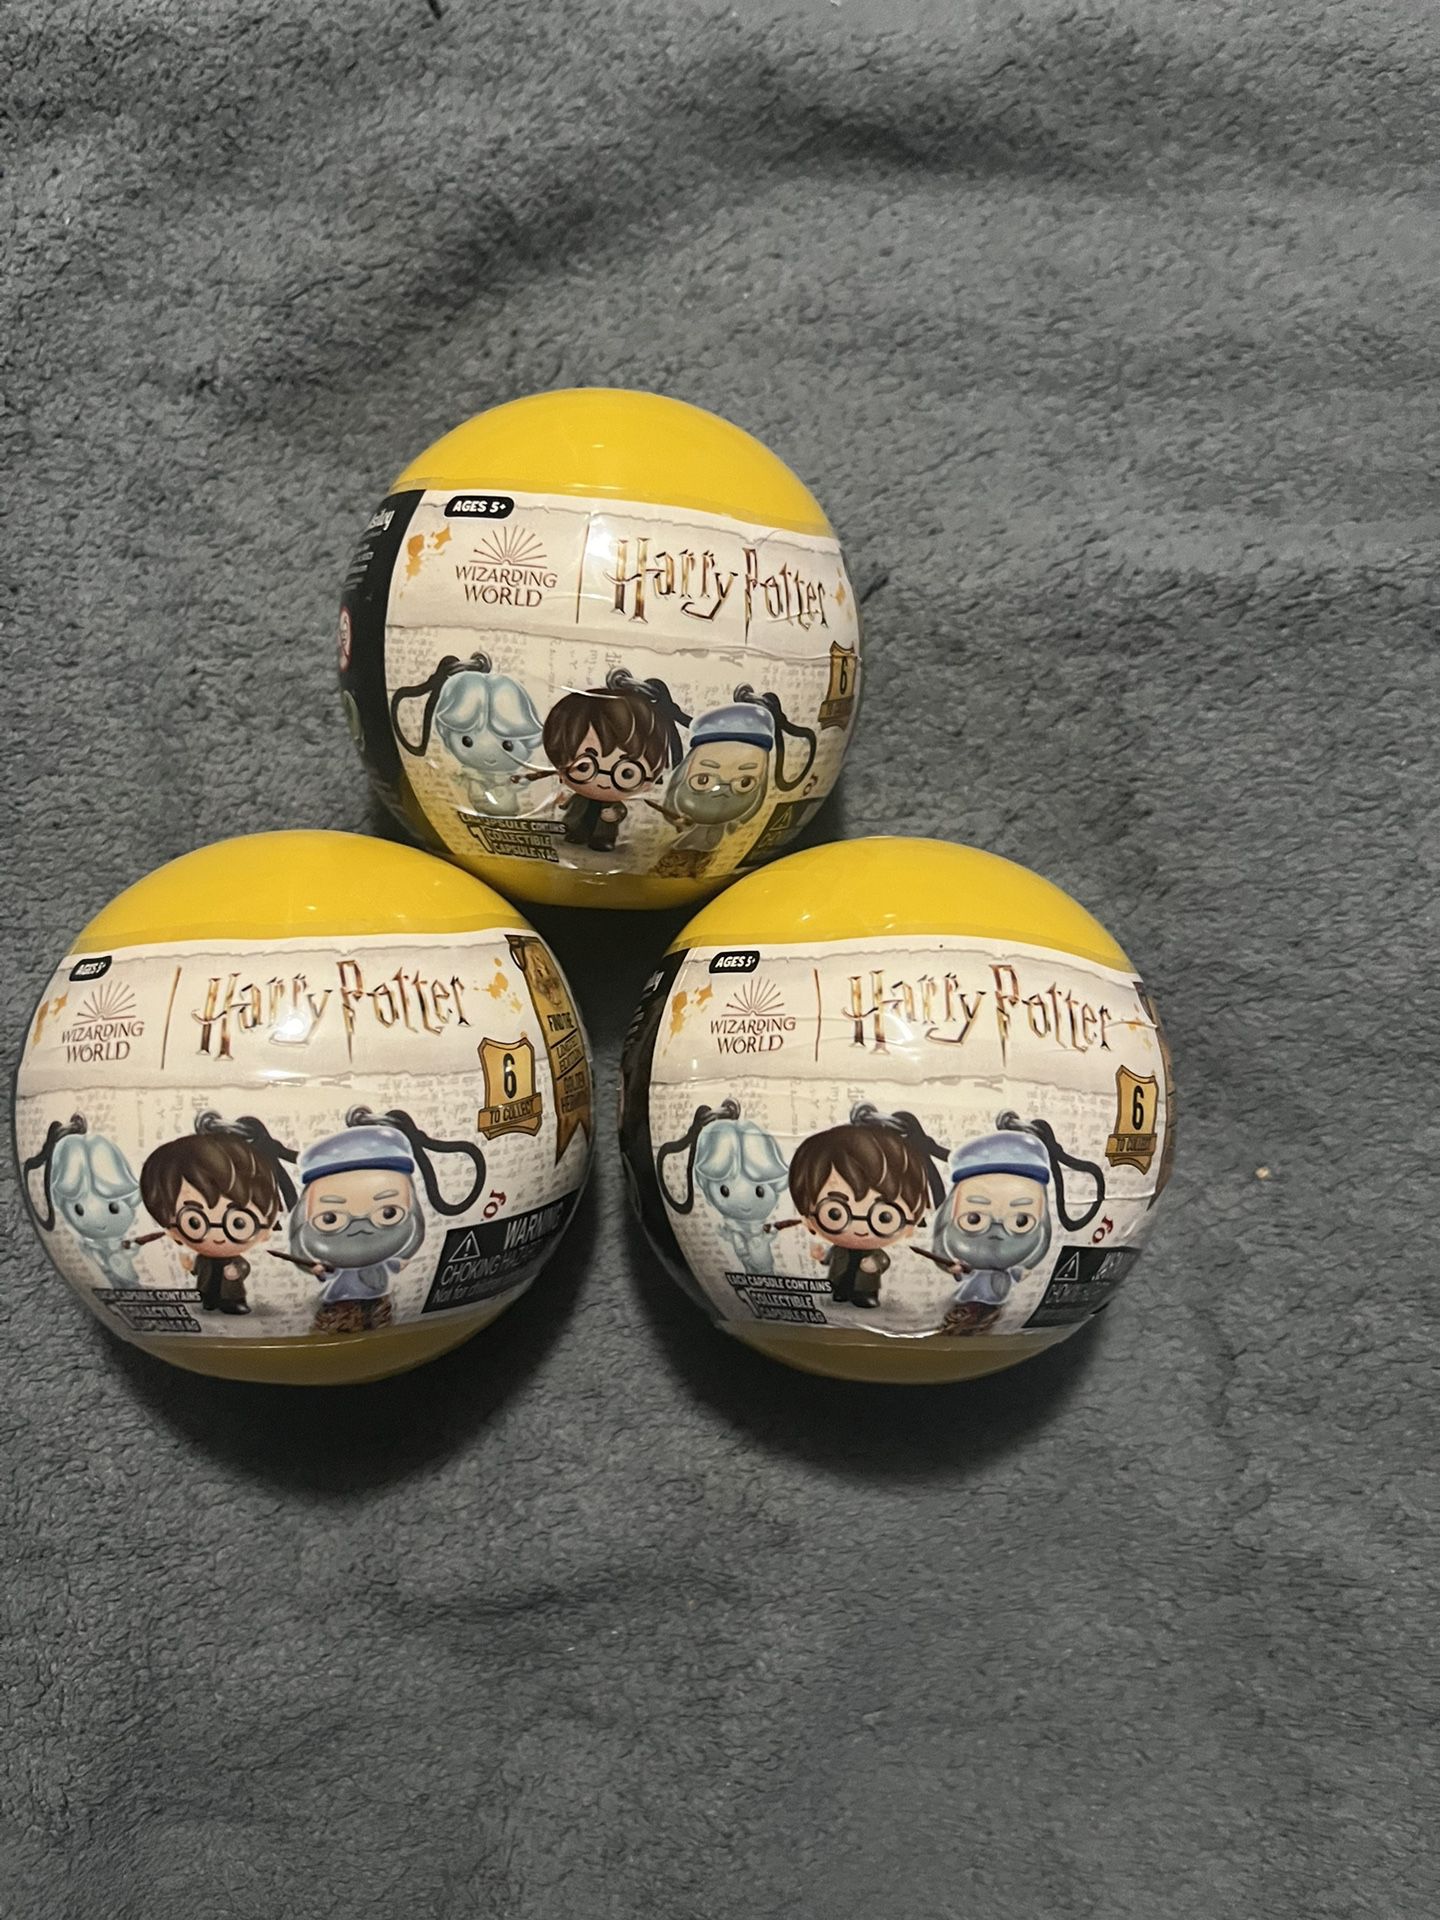 Harry Potter Collectible Capsule Tag Lot of 3 Sealed Gold Blind Capsule Globes